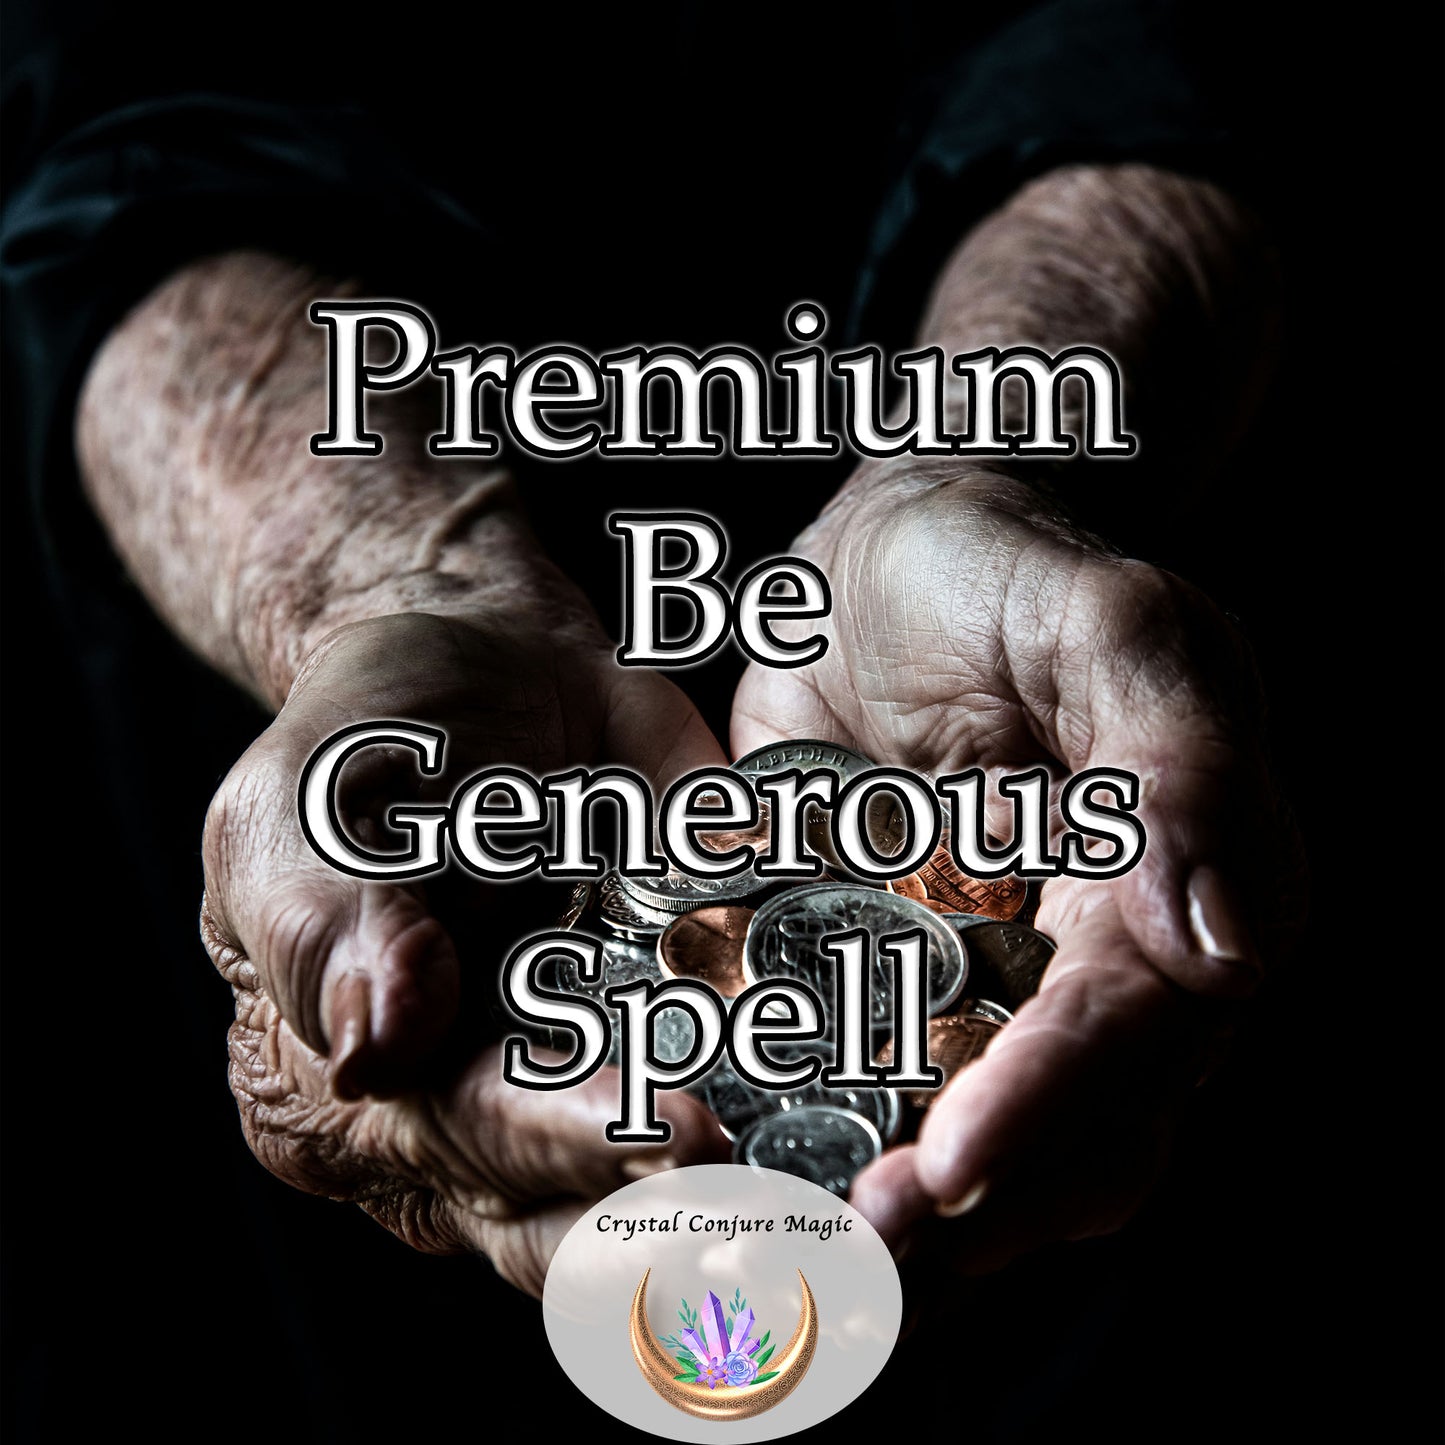 Premium Be Generous Spell - open your heart and mind to the joy of giving, cultivate a spirit of abundance within you